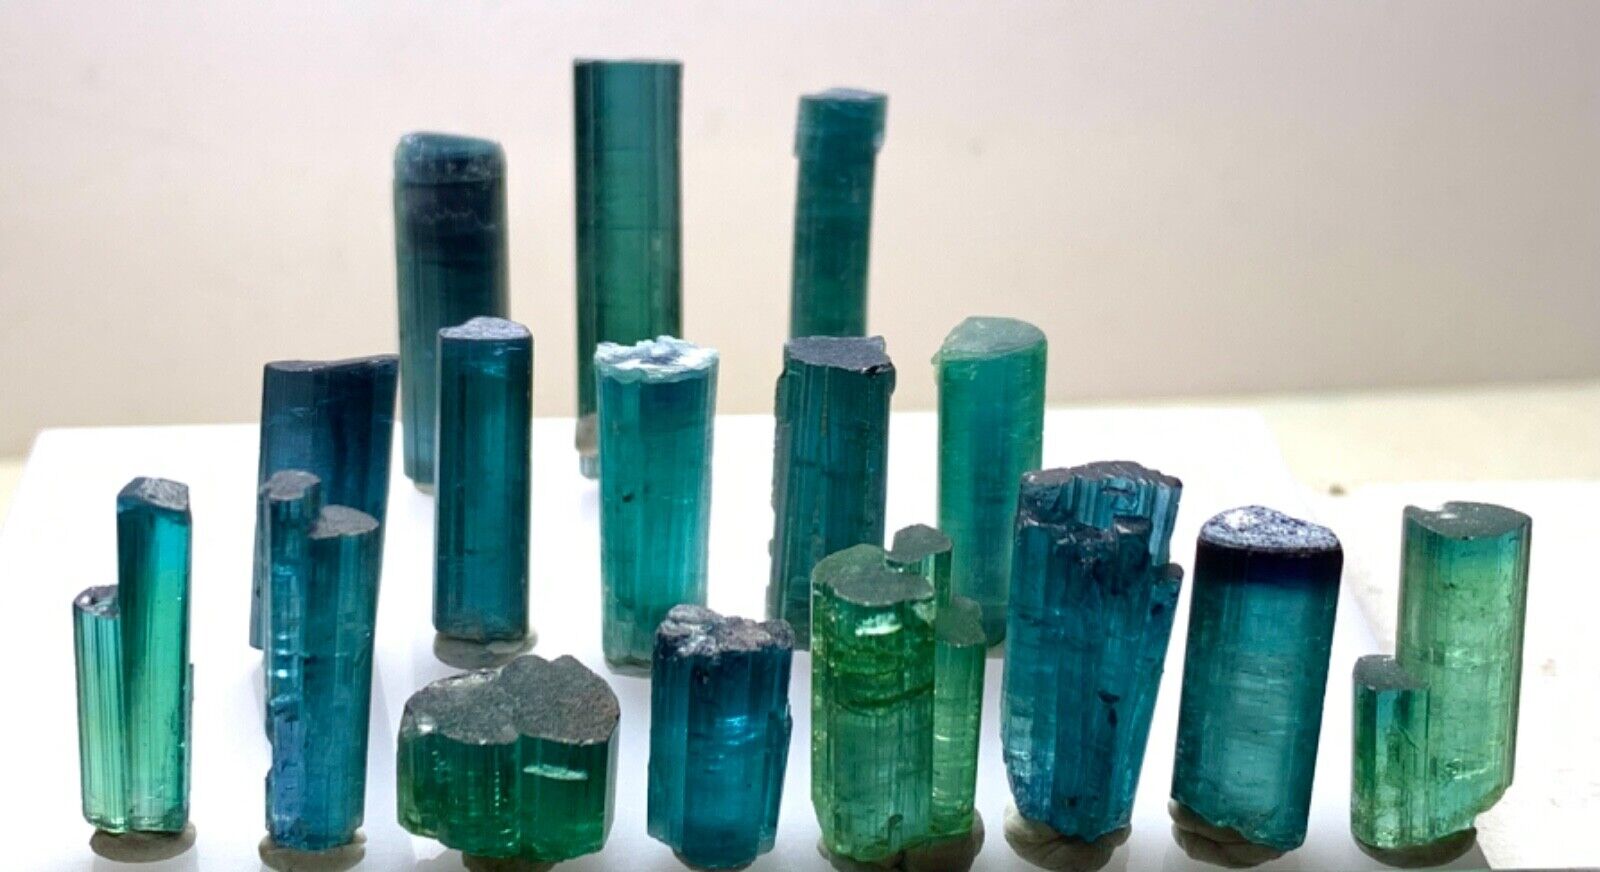 100.45 Ct Blue Colour Well Terminated Tourmaline Crystals From Afghanistan